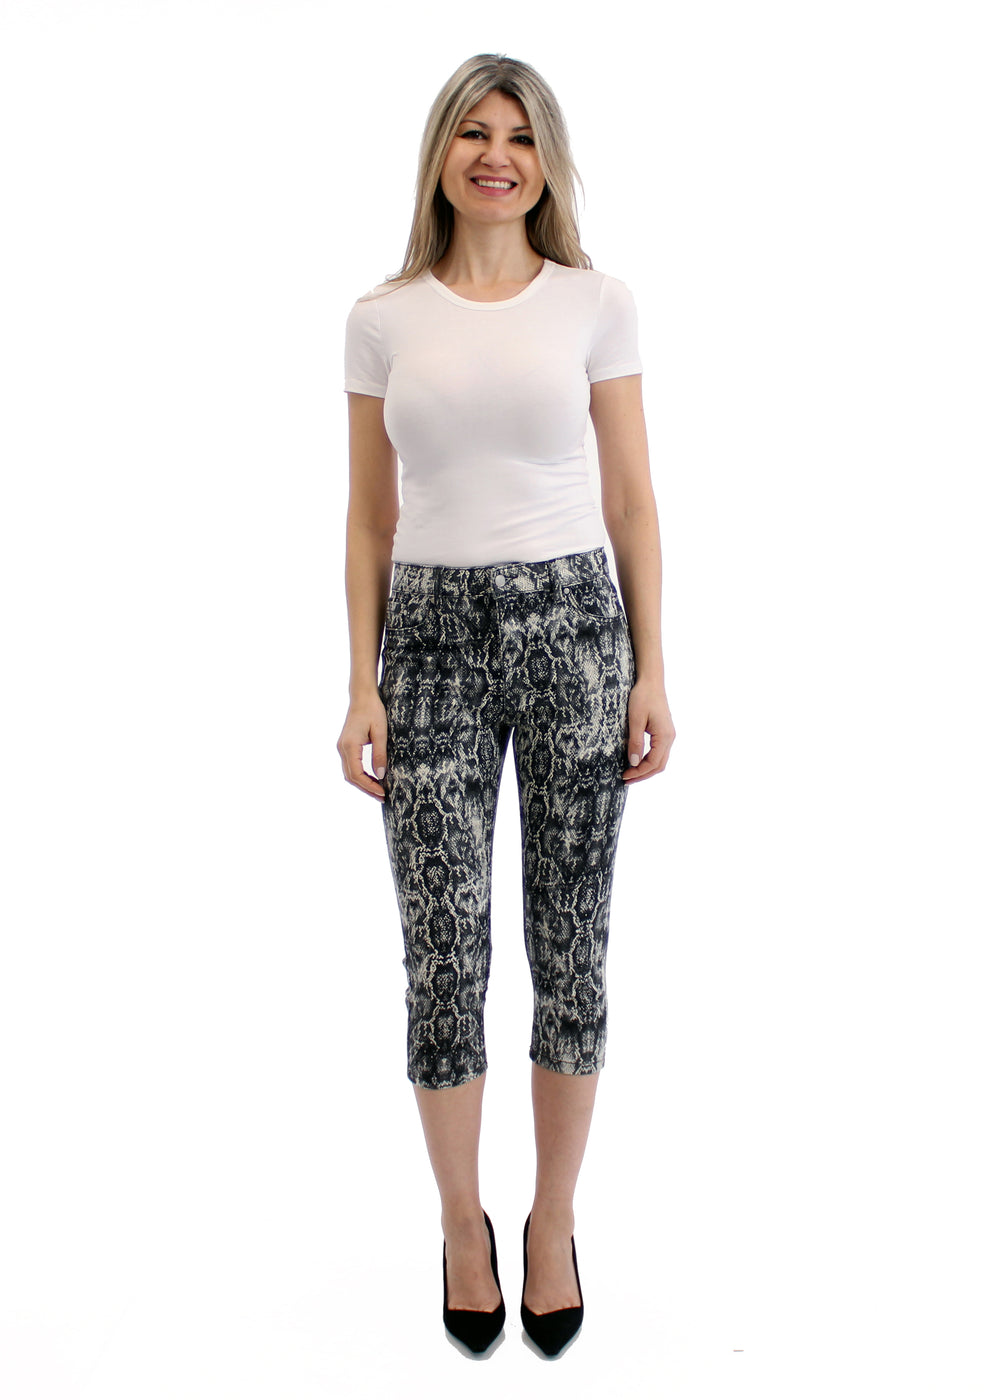 Women's Mid Rise Snake Printed Stretch Capris